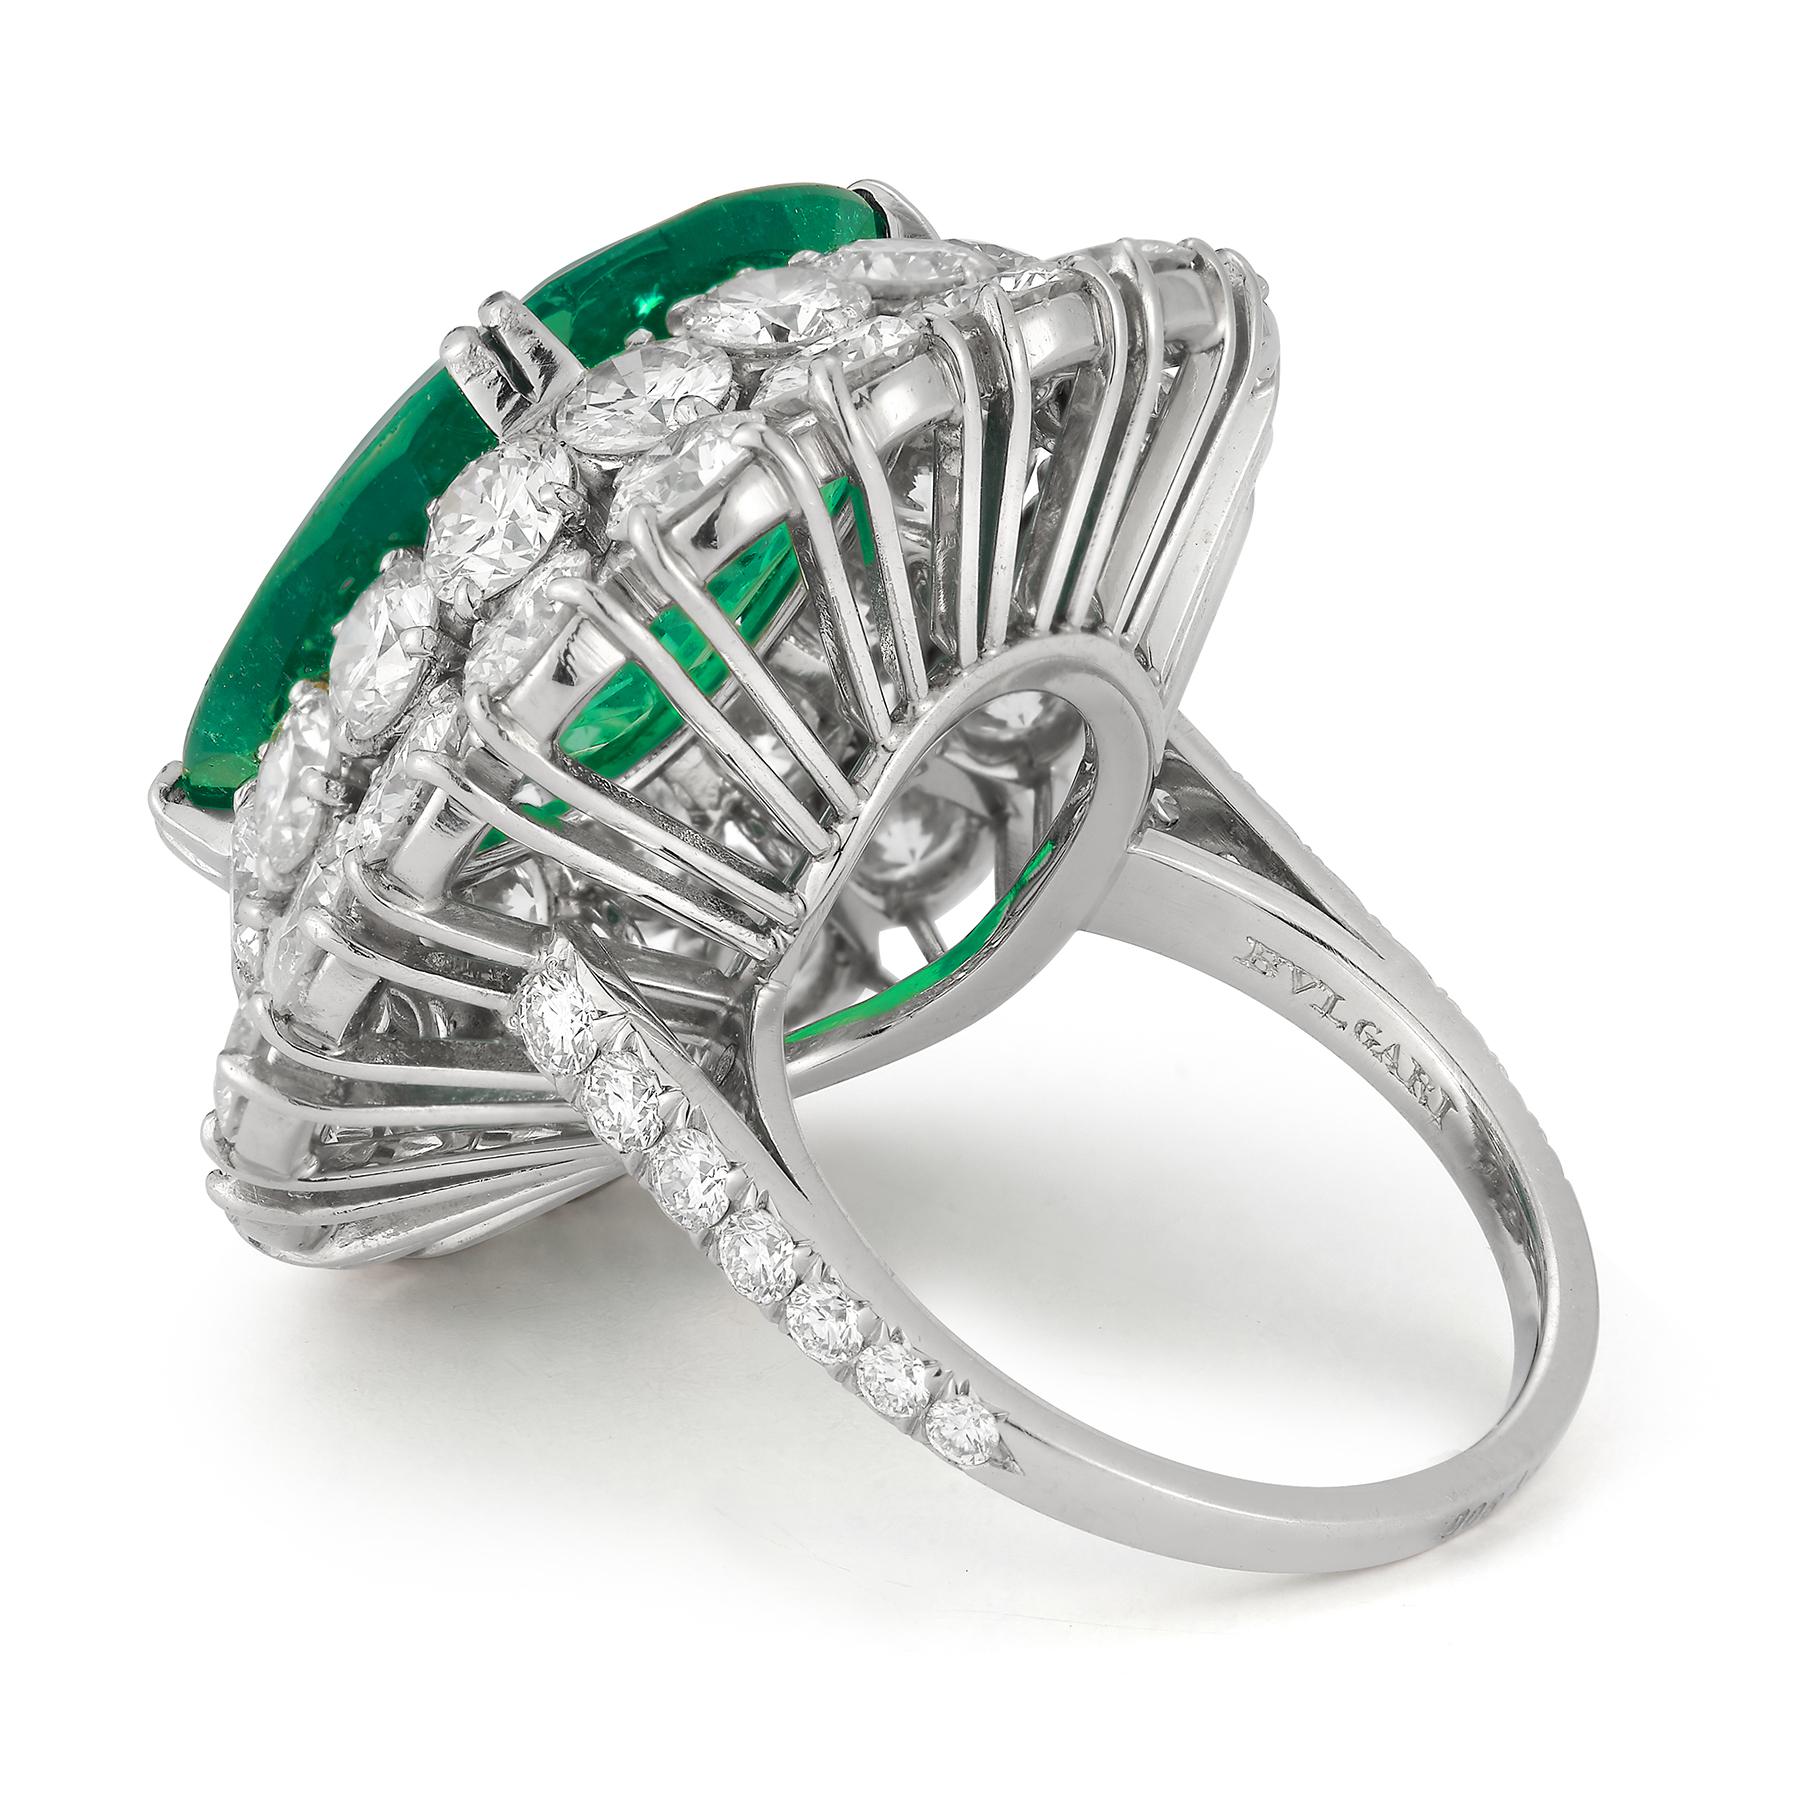 10.64 Carat Certified Colombian Emerald Ring by Bvlgari In Excellent Condition For Sale In New York, NY